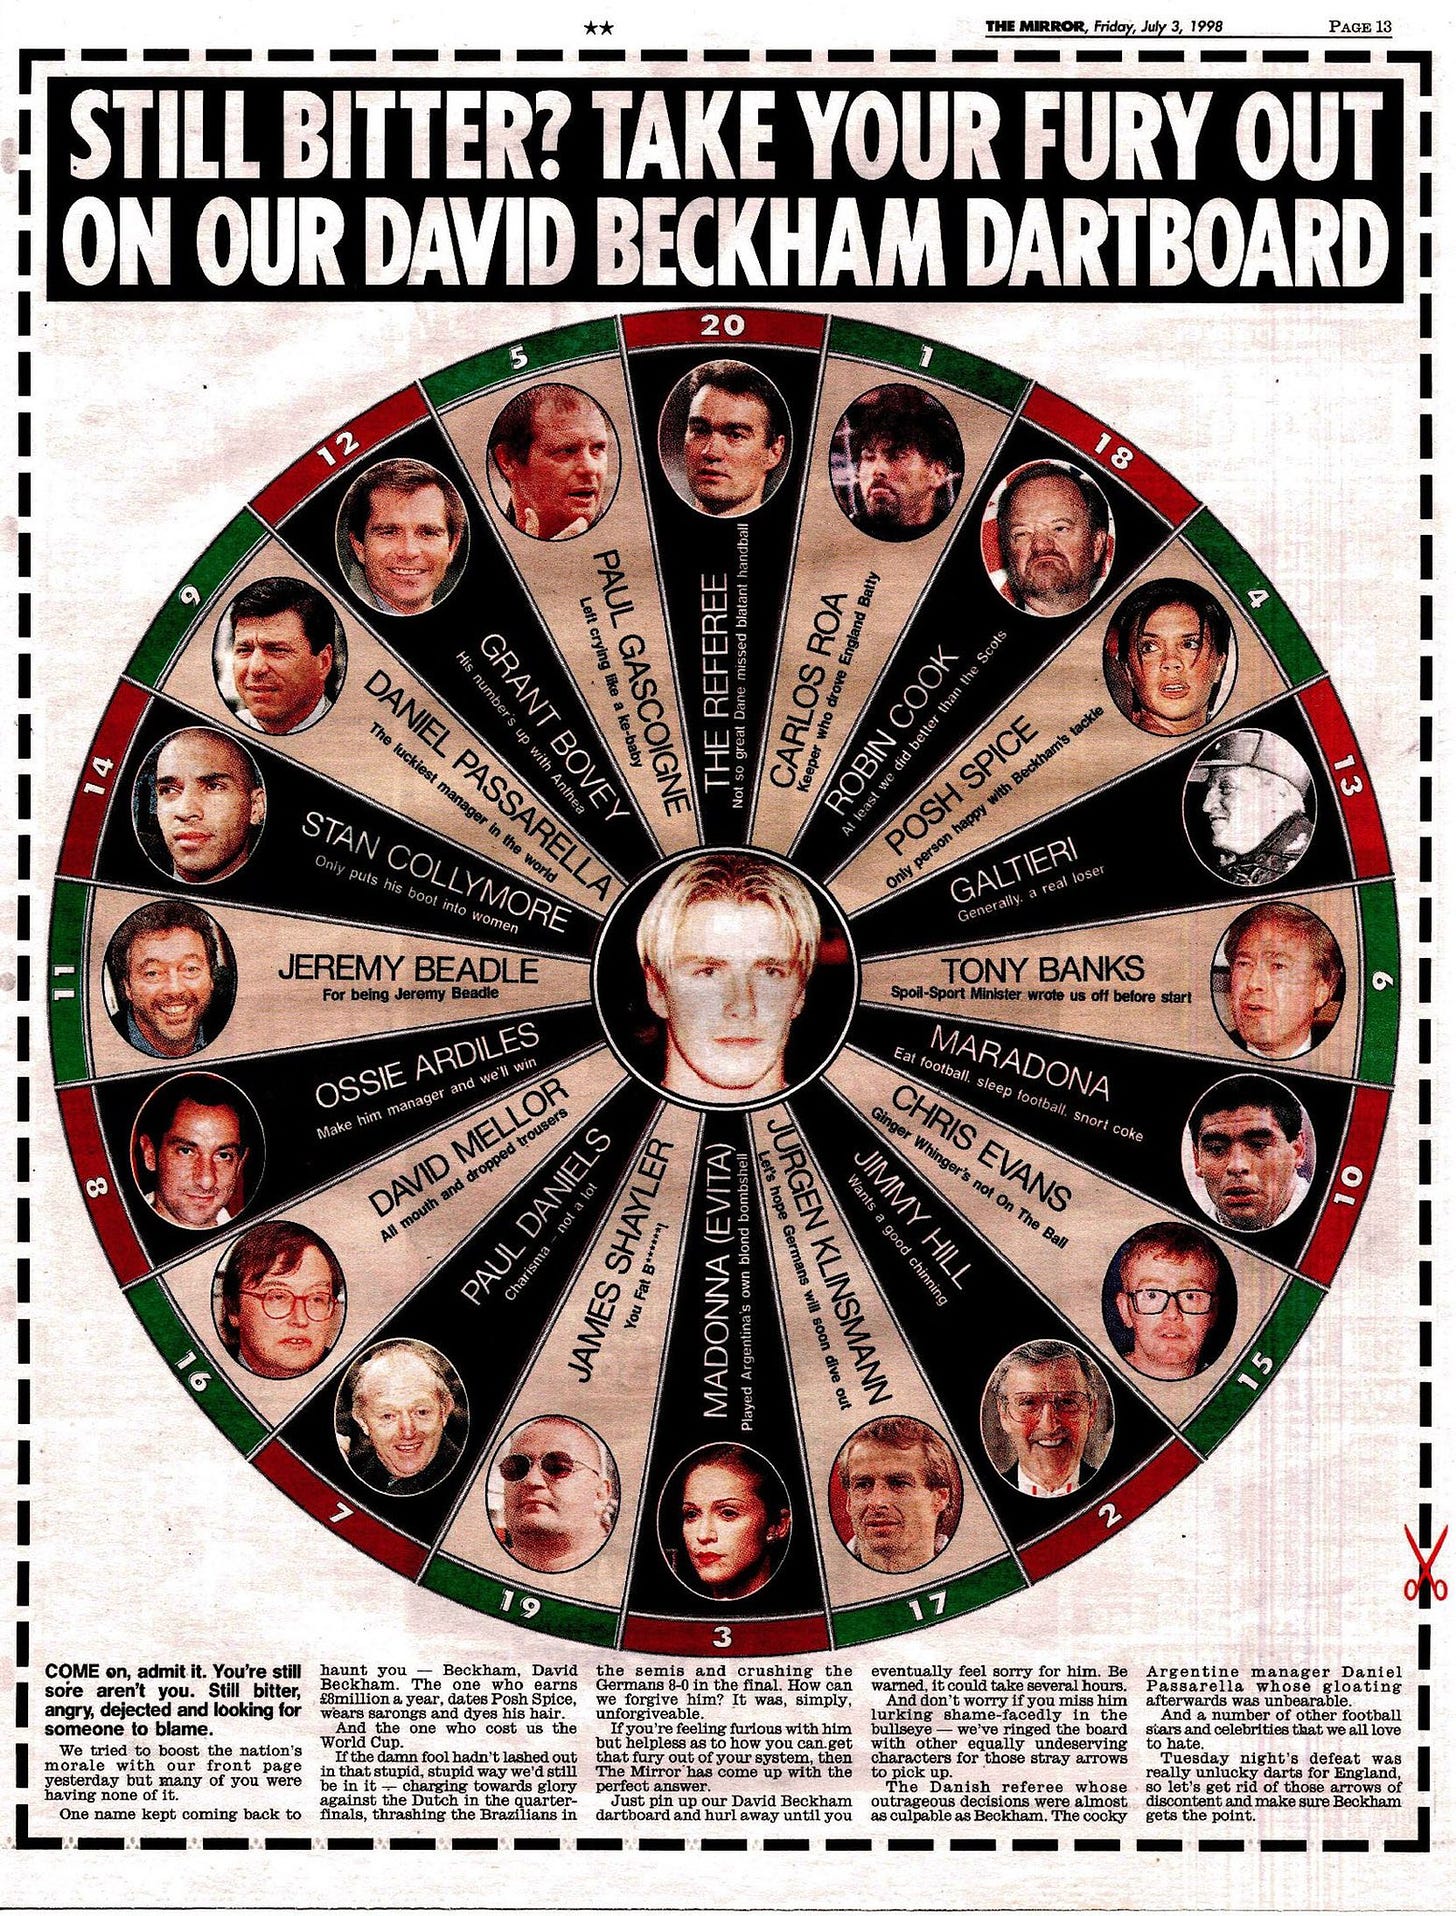 Stu's Football Flashbacks on X: "It's the 22nd Anniversary of David  Beckham's red card against Argentina. Still fuming a few days later, The  Daily Mirror printed a 'David Beckham Dartboard', which included